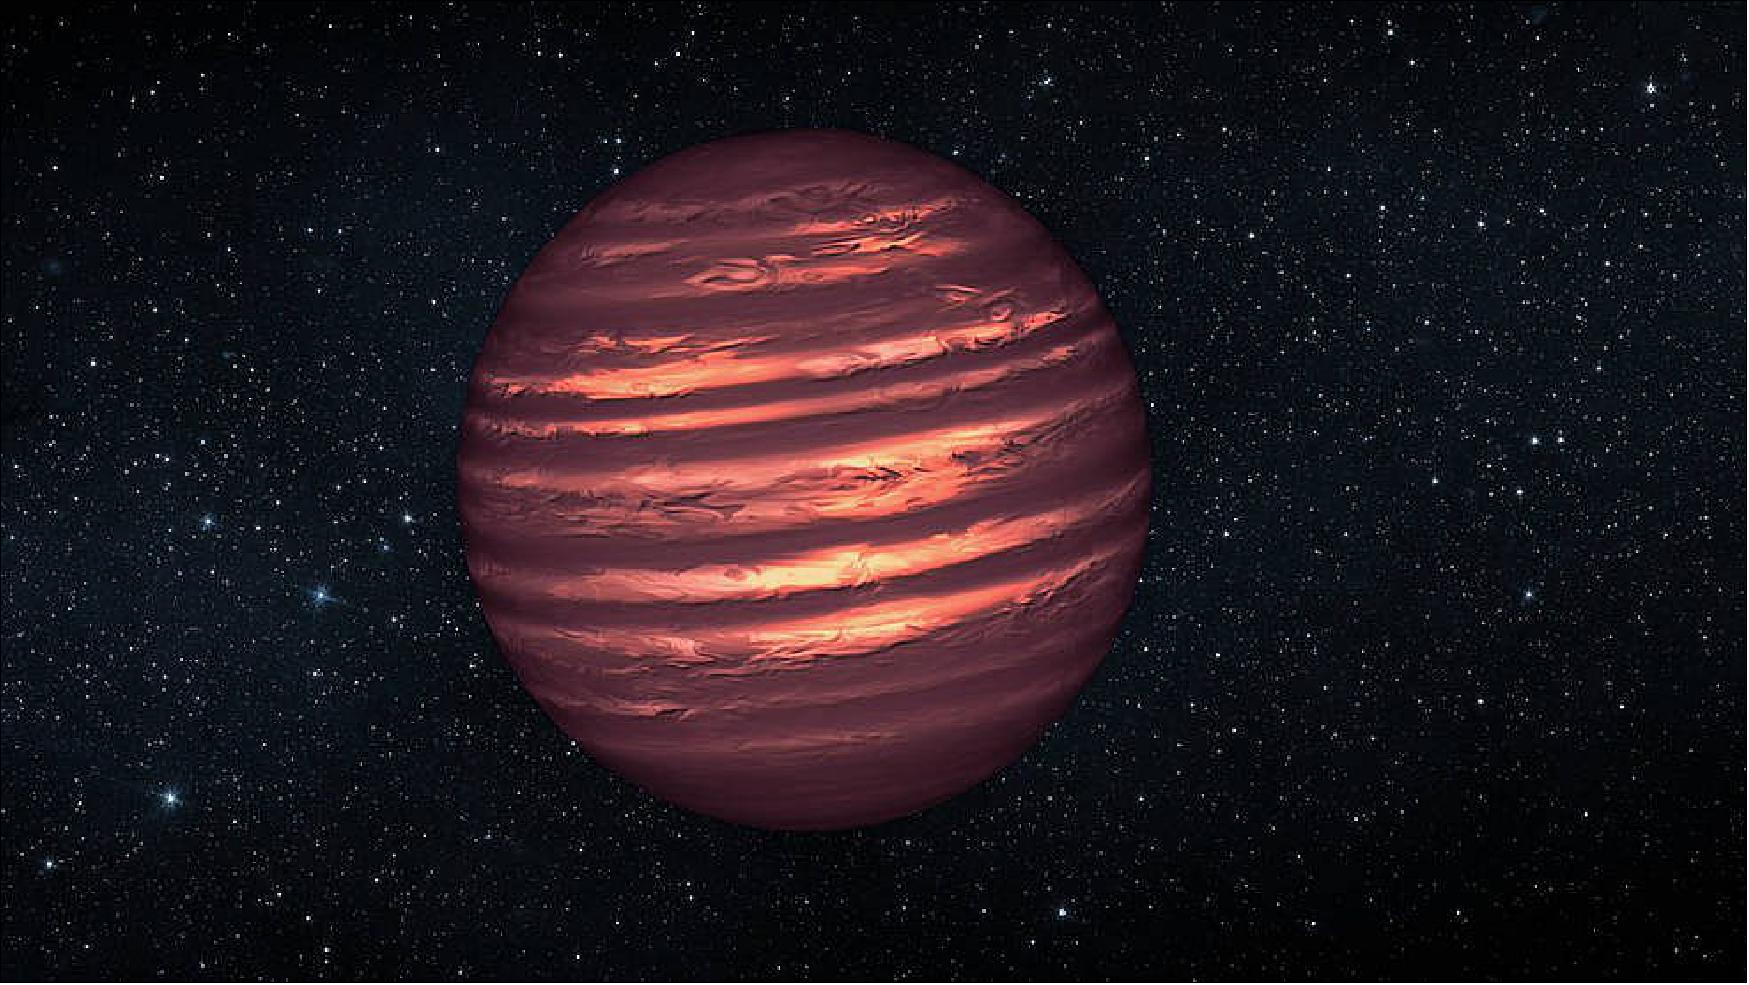 Figure 20: Artist’s conception of a brown dwarf, featuring the cloudy atmosphere of a planet and the residual light of an almost-star (image credit: NASA/ESA/JPL)